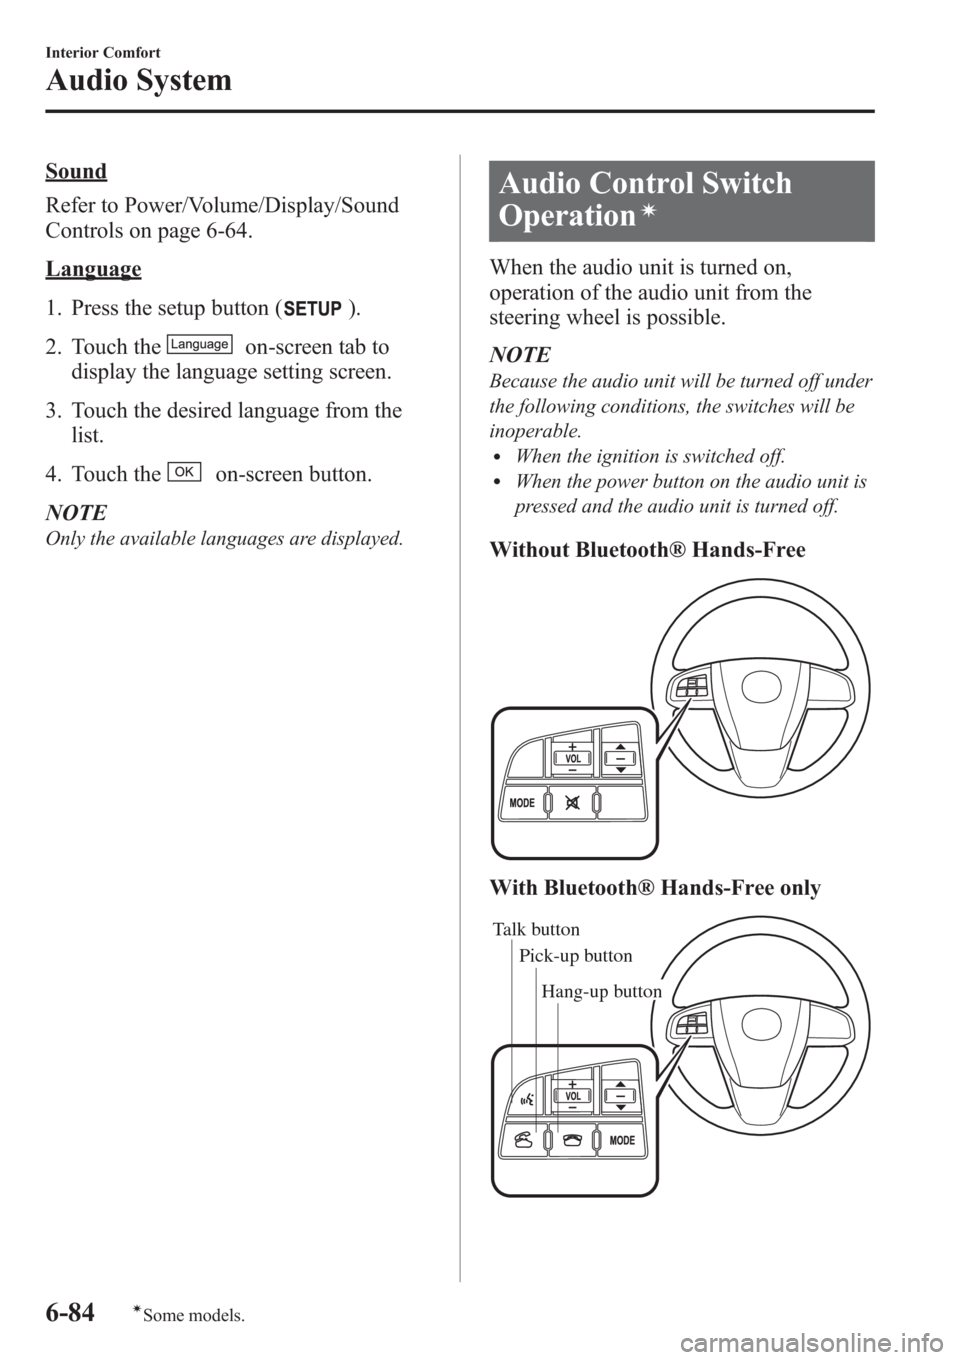 MAZDA MODEL 3 HATCHBACK 2013  Owners Manual (in English) Sound
Refer to Power/Volume/Display/Sound
Controls on page 6-64.
Language
1. Press the setup button (
).
2. Touch the
on-screen tab to
display the language setting screen.
3. Touch the desired languag